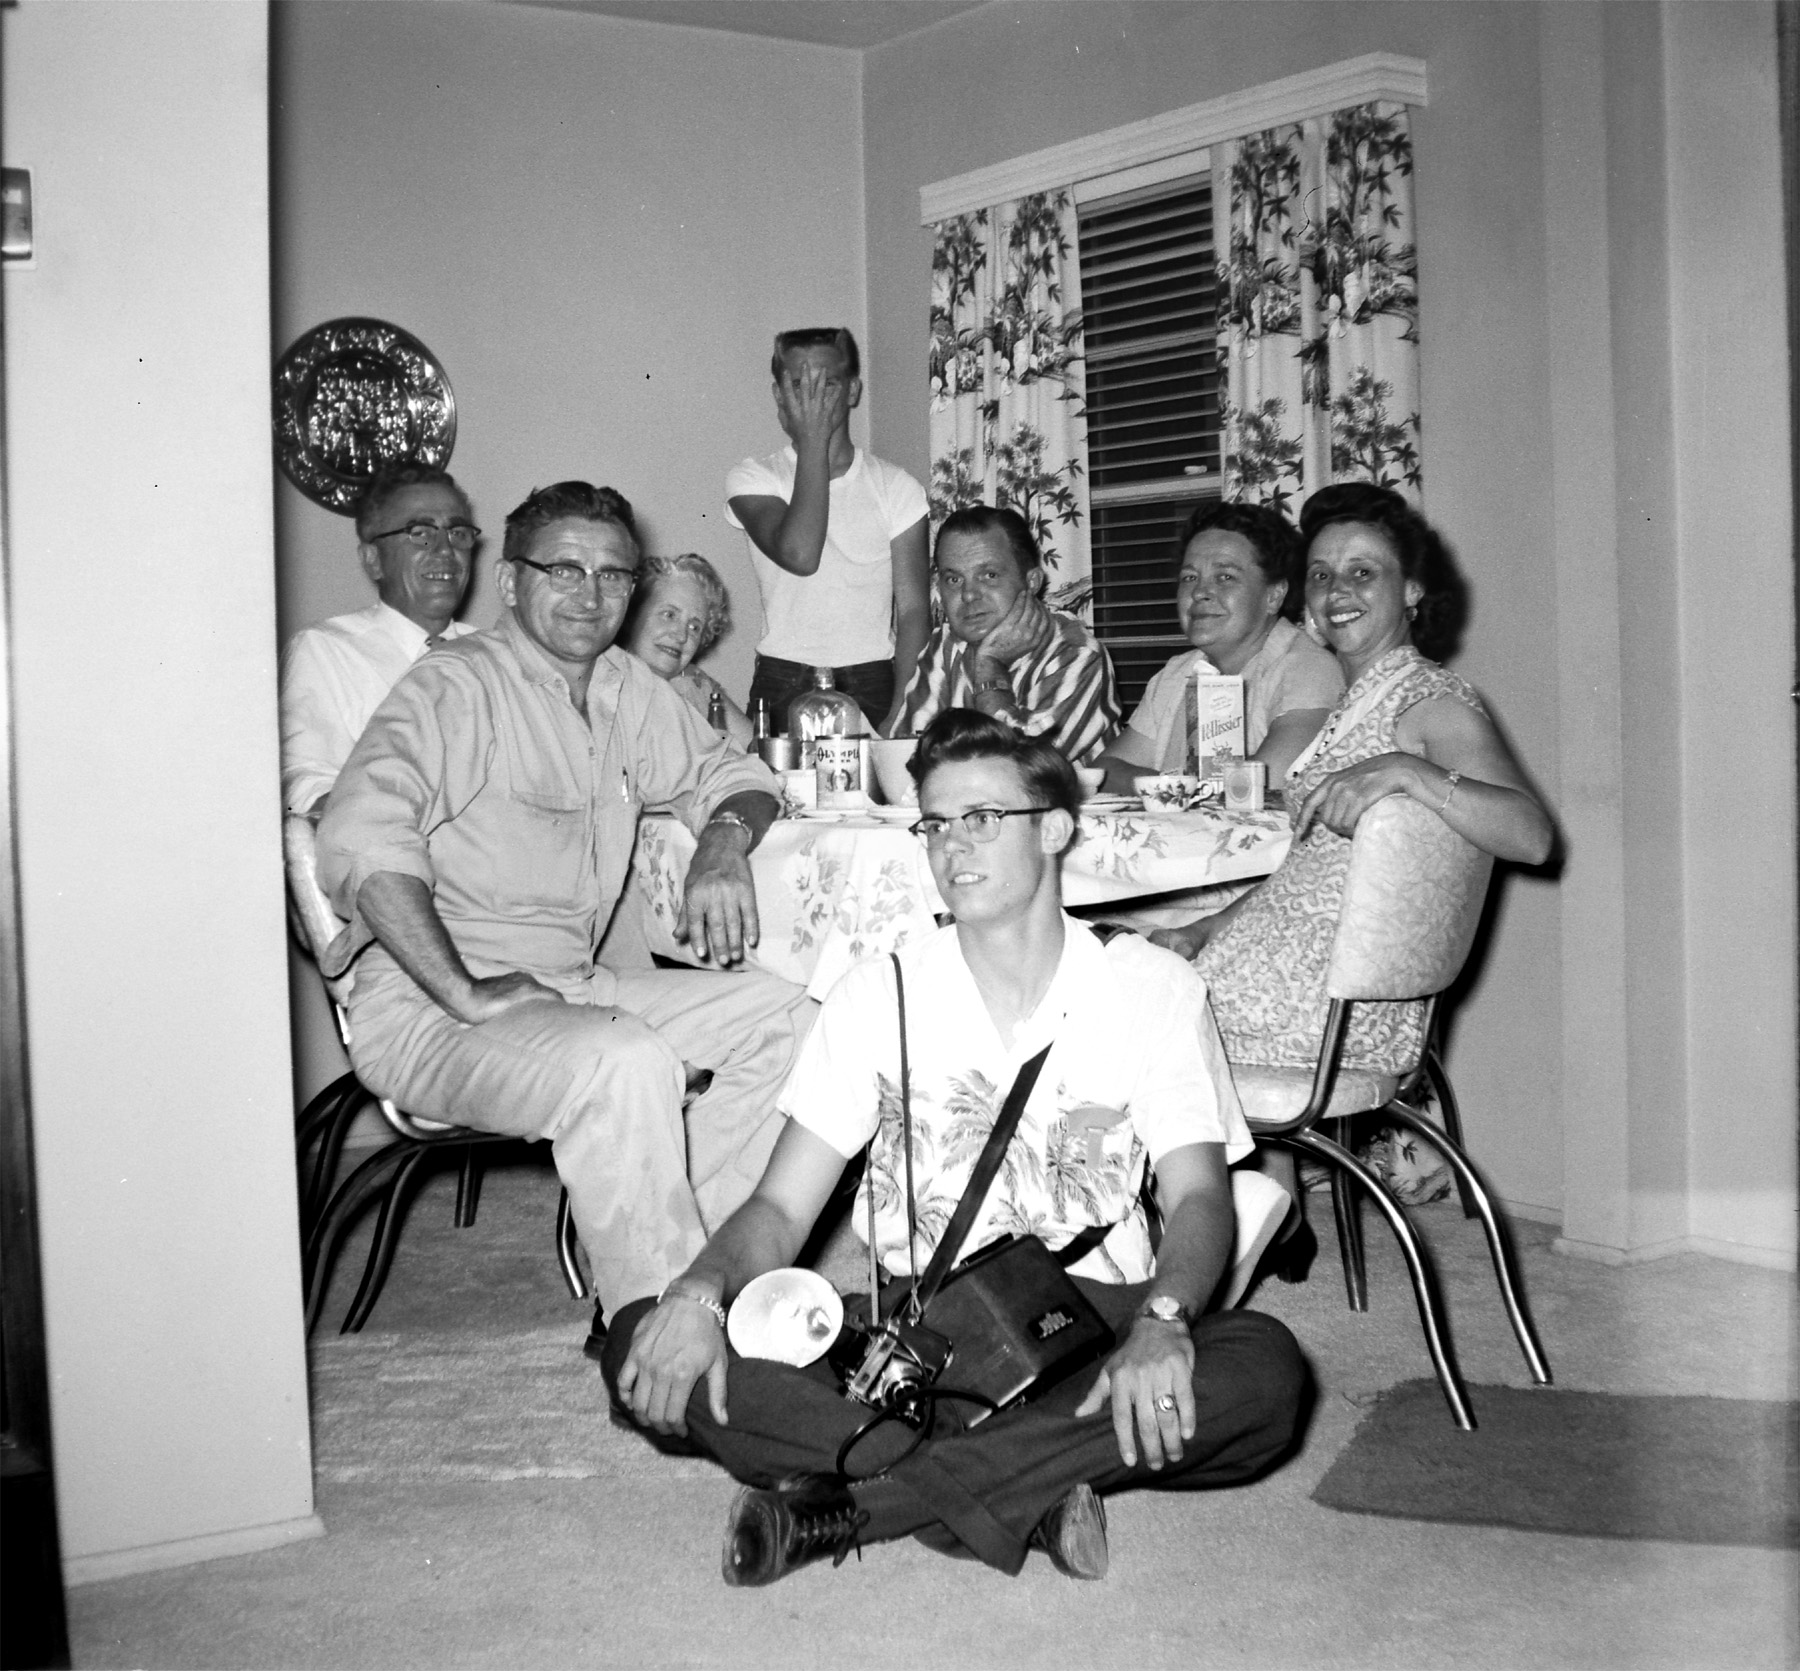 This was taken at my great grandparents house in LA who are seated at the table (second from left and far right) with some neighbors. They were very close with their neighbors, something I think is missing in many suburbs these days (including my own). Can anyone identify the camera? View full size.